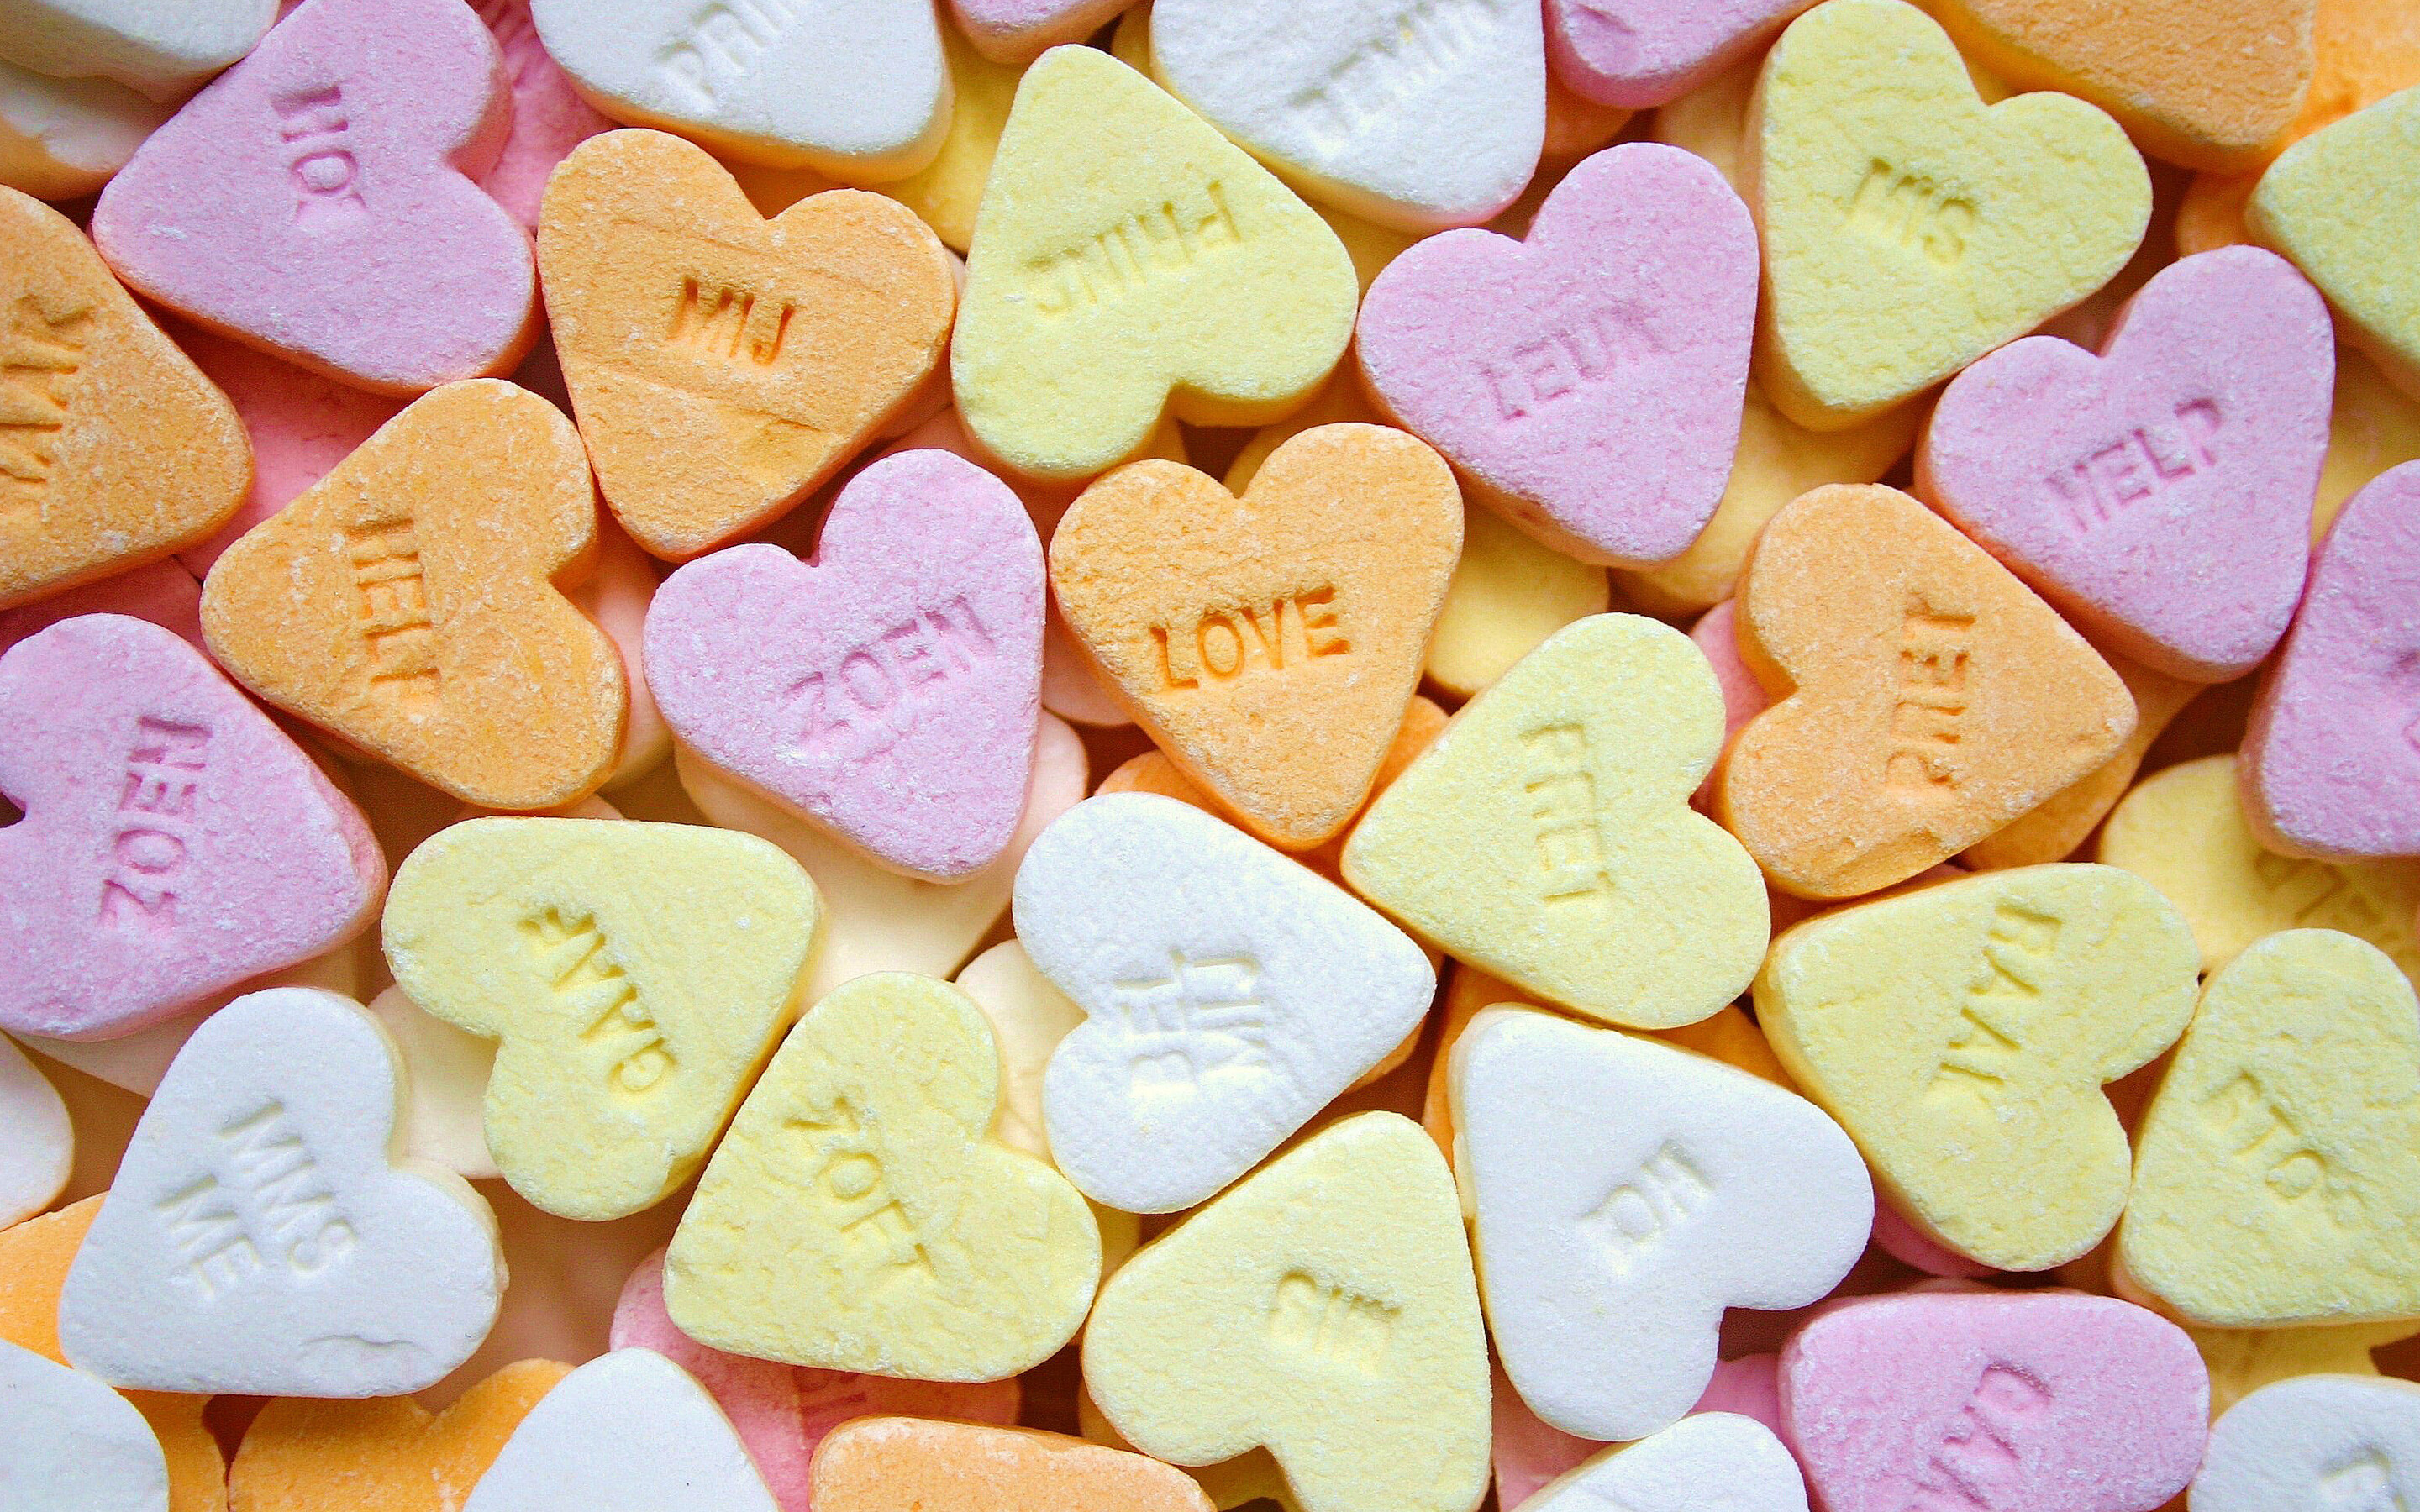 Sweets: Sweethearts, Small heart-shaped sugar candies sold around Valentine's Day. 2880x1800 HD Wallpaper.